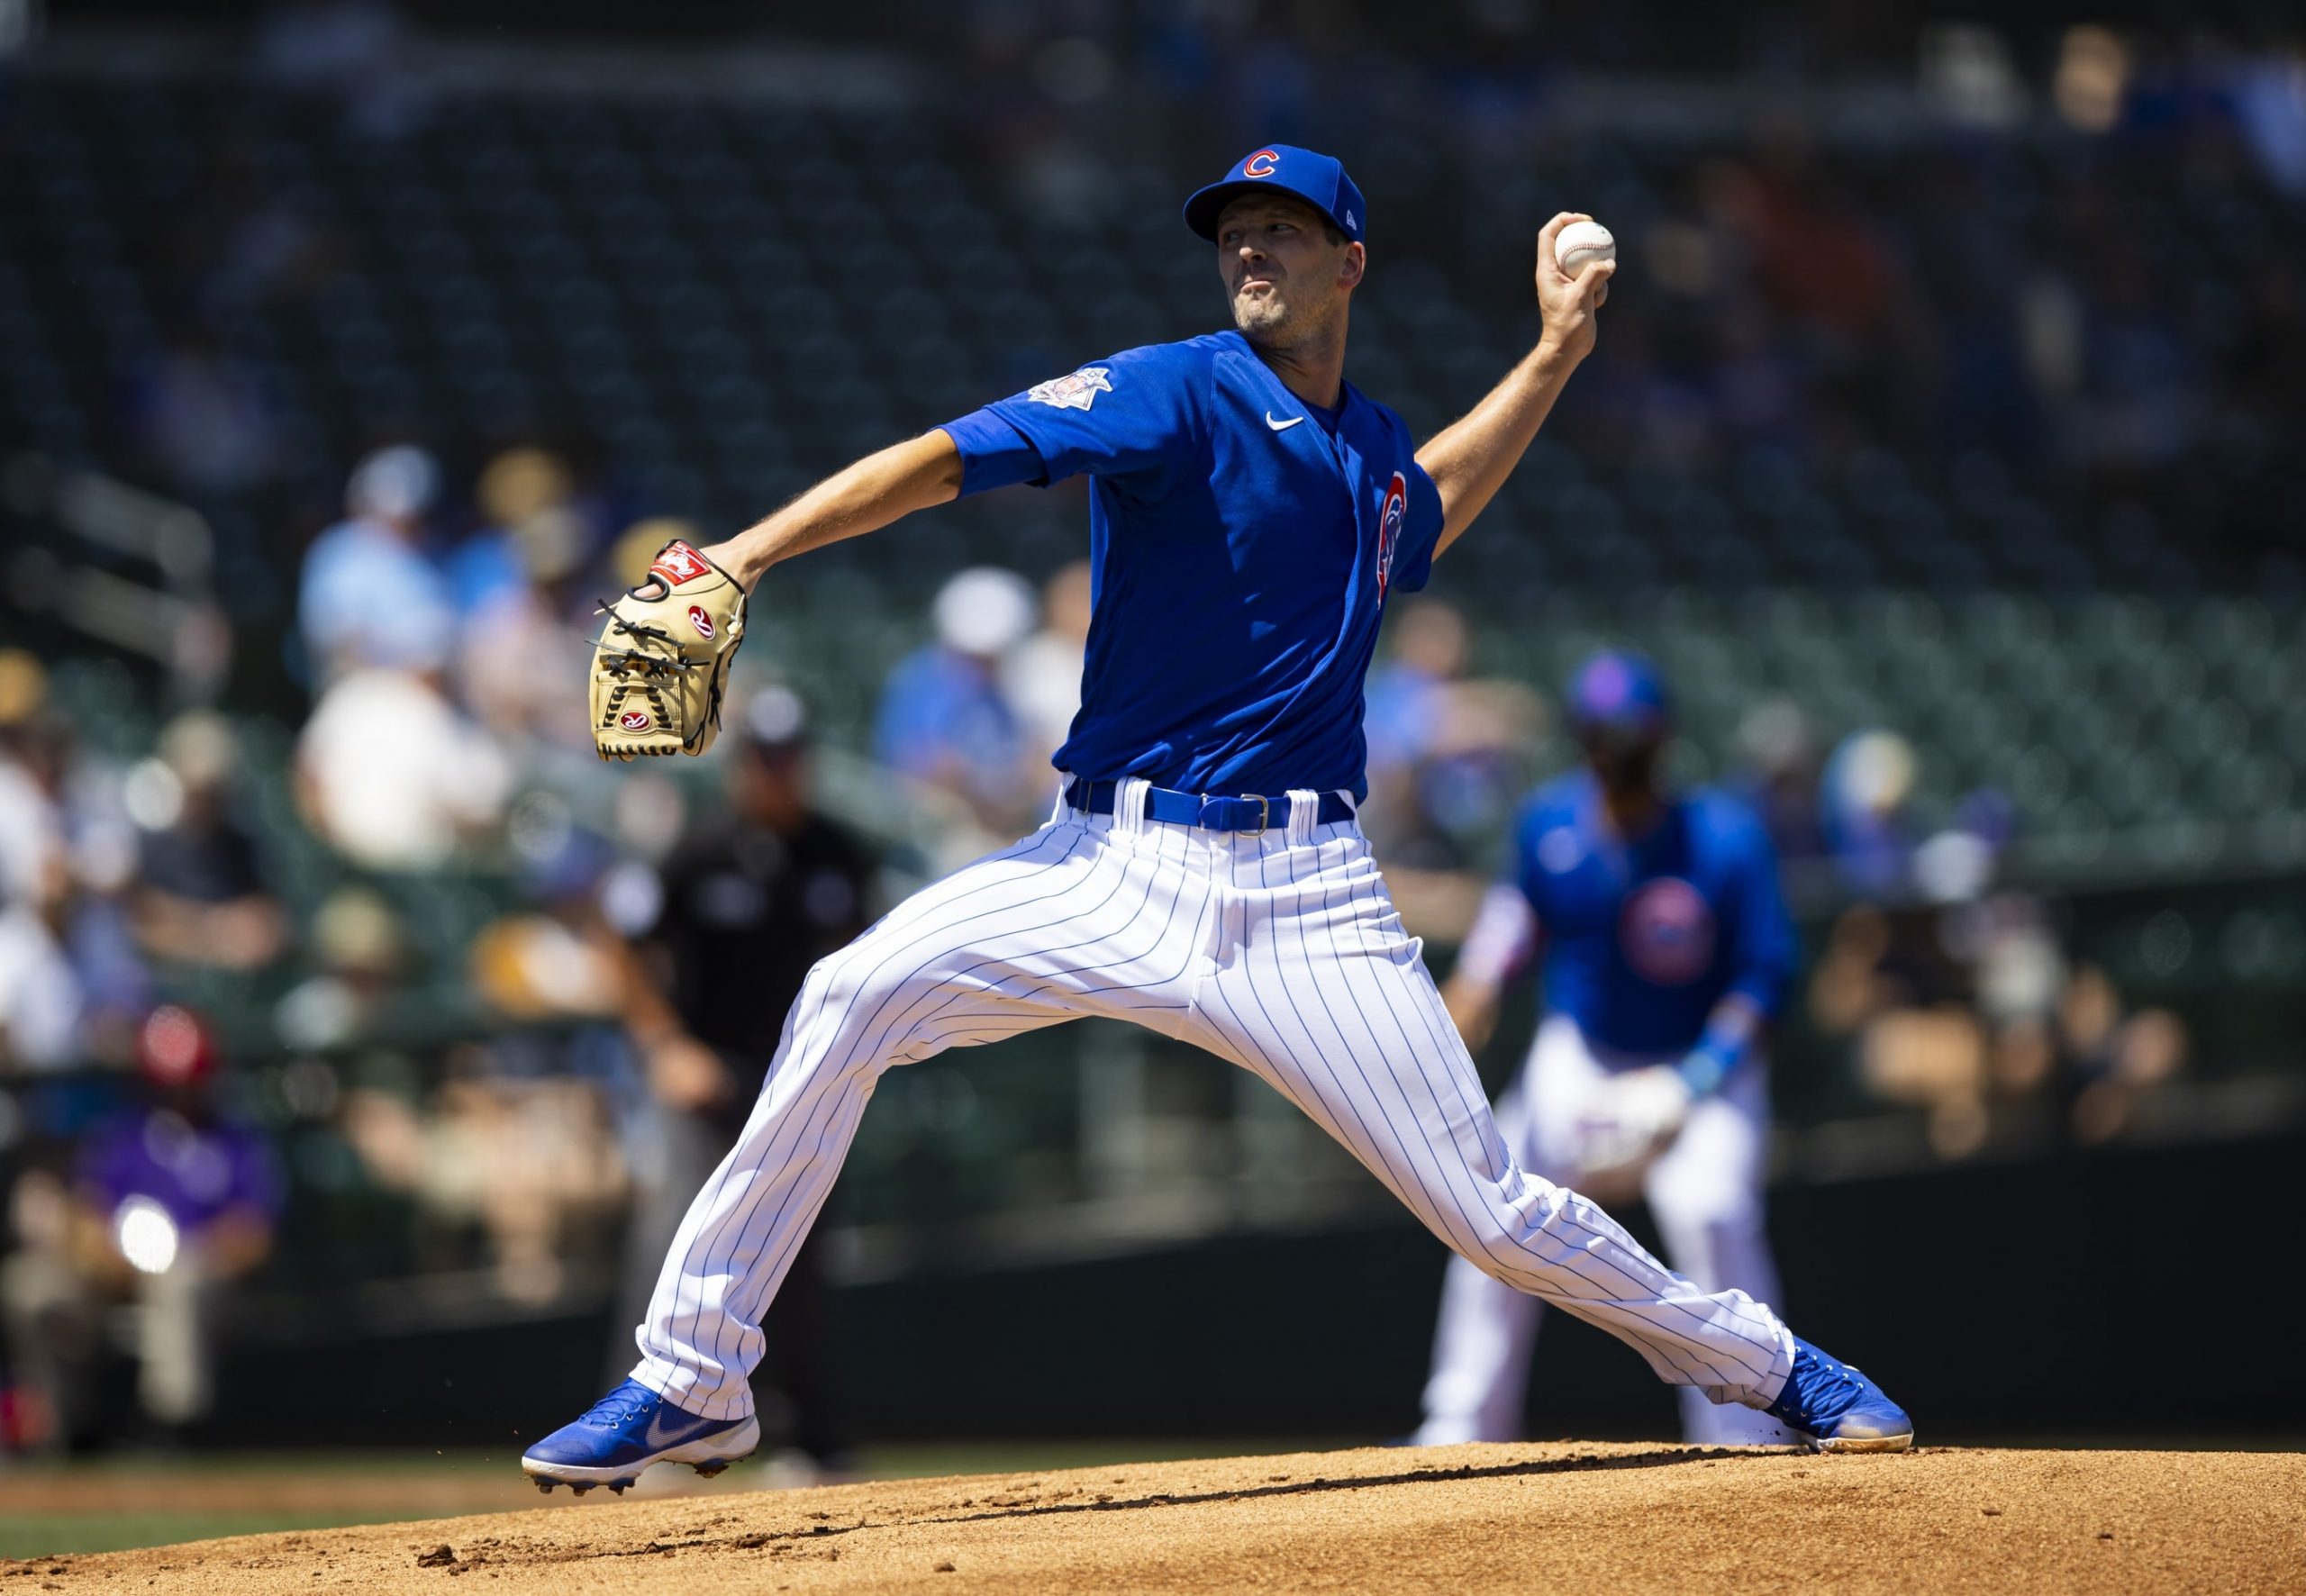 Drew Smyly of the Chicago Cubs